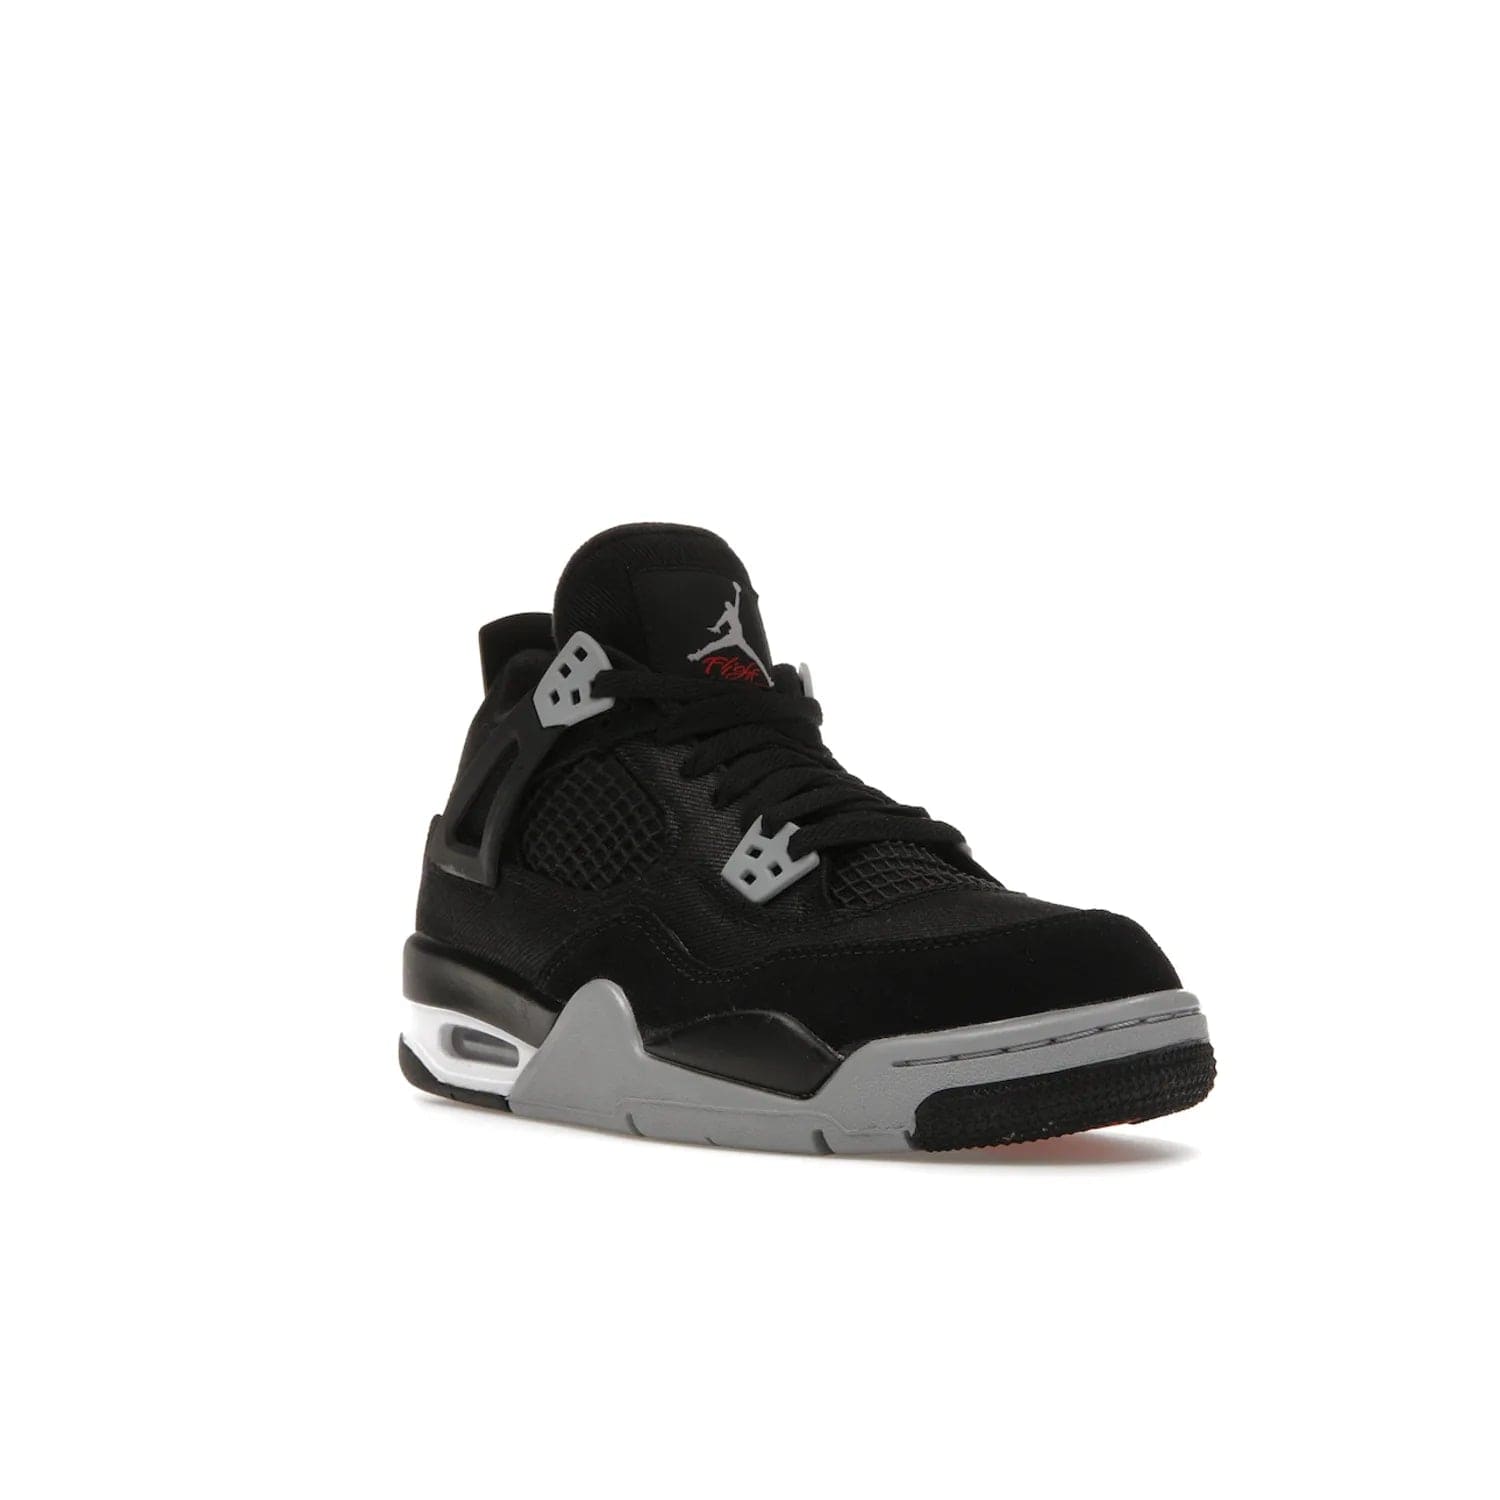 Jordan 4 Retro Black Canvas (GS) - Image 6 - Only at www.BallersClubKickz.com - Premium Air Jordan 4 Retro Black Canvas in grade-schooler's catalog. Featuring black suede canvas upper, grey molding, accents in red, white midsole, woven Jumpman tag, & visible AIR cushioning. Releasing Oct. 1, 2022.